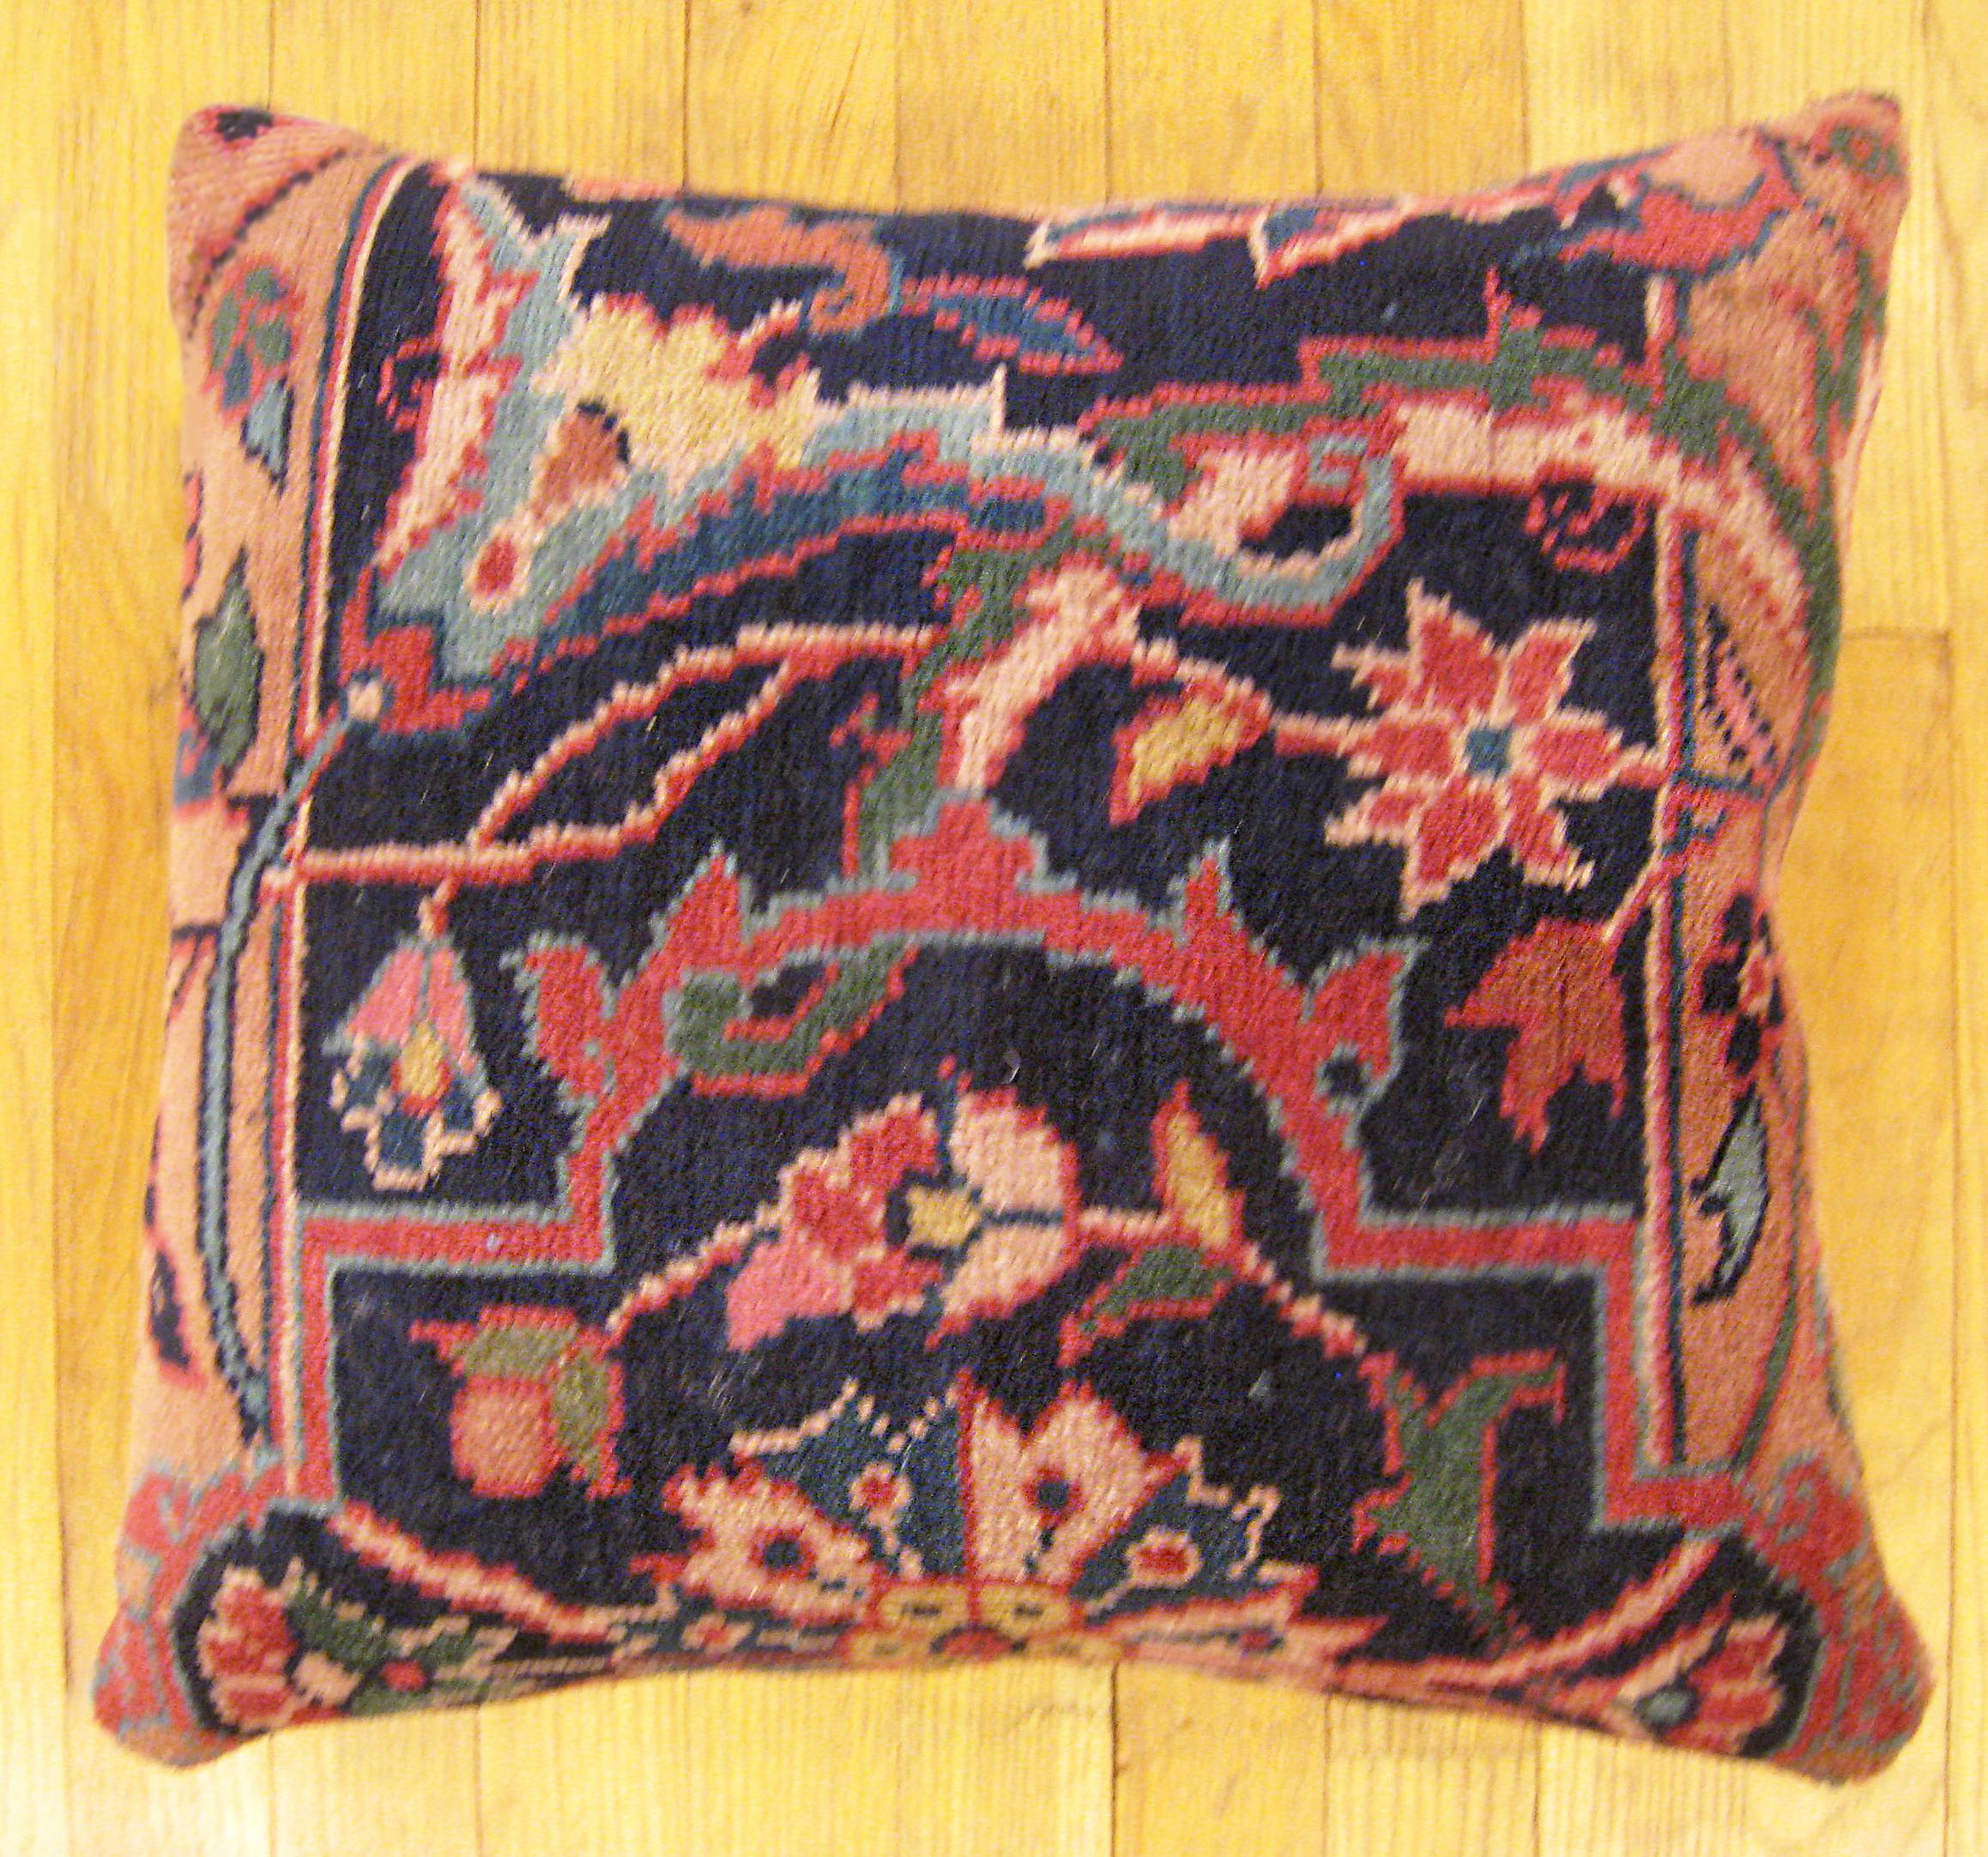 Antique Indian Agra rug pillow; size 1'6” x 1'4”.

An antique decorative pillow with floral elements allover a coral central field, size 1'6” x 1'4”. This lovely decorative pillow features an antique fabric of a Agra rug on front which is